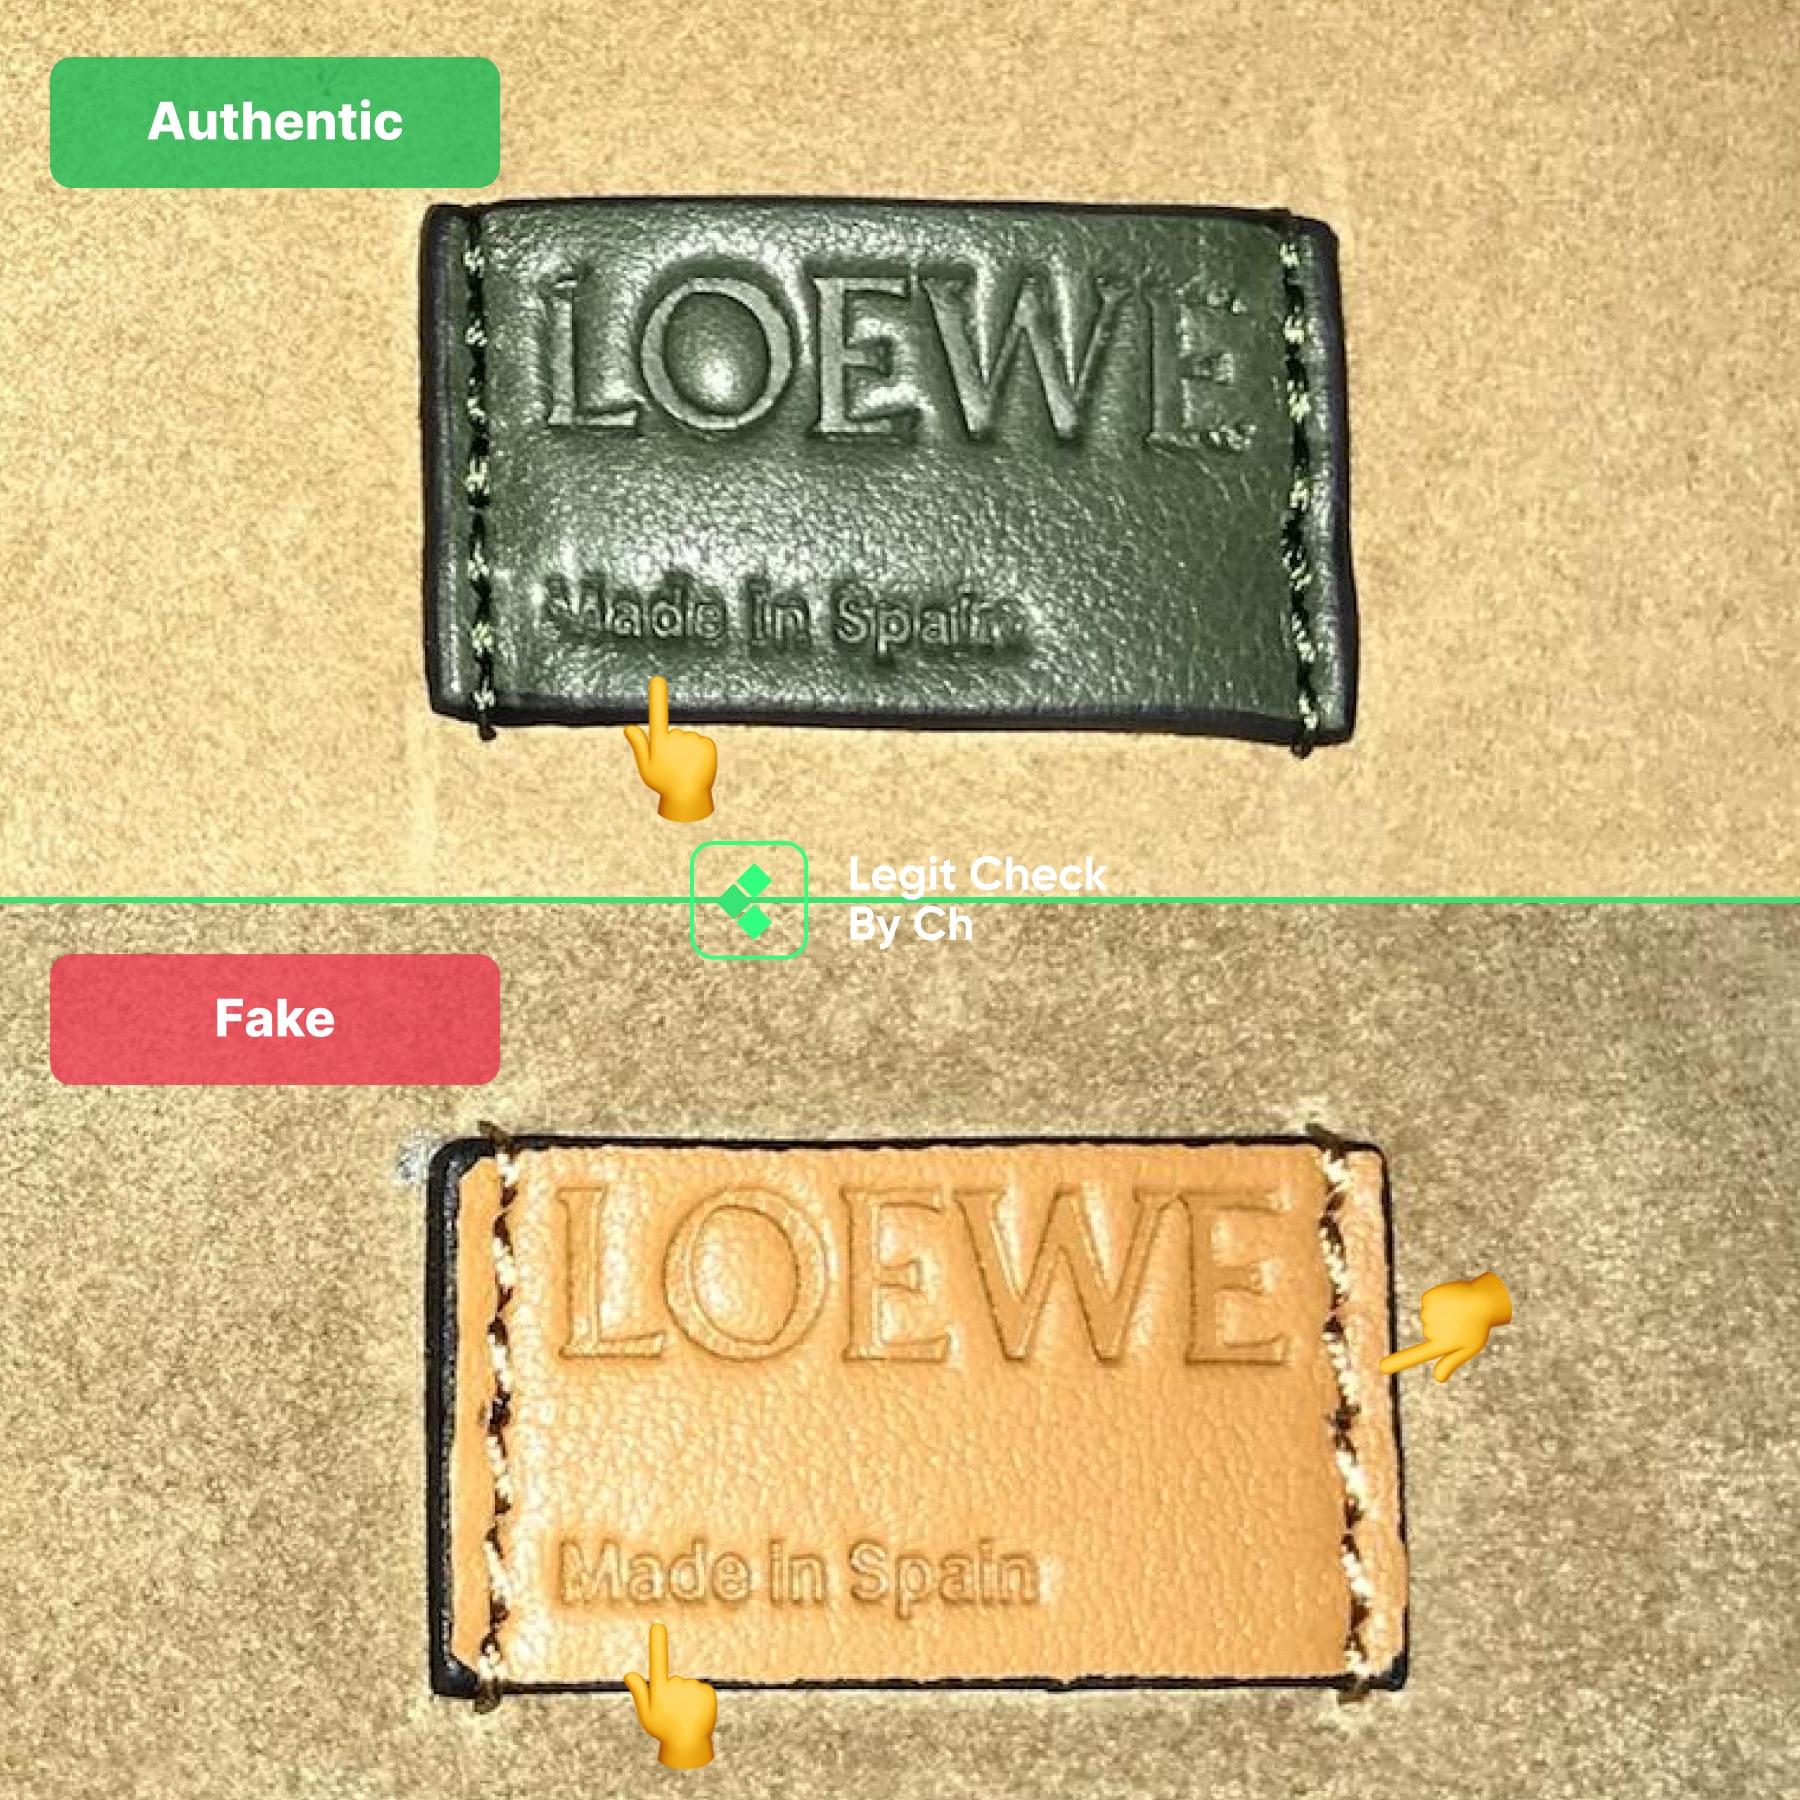 Loewe: How To Spot Fake Bags (With Pictures)